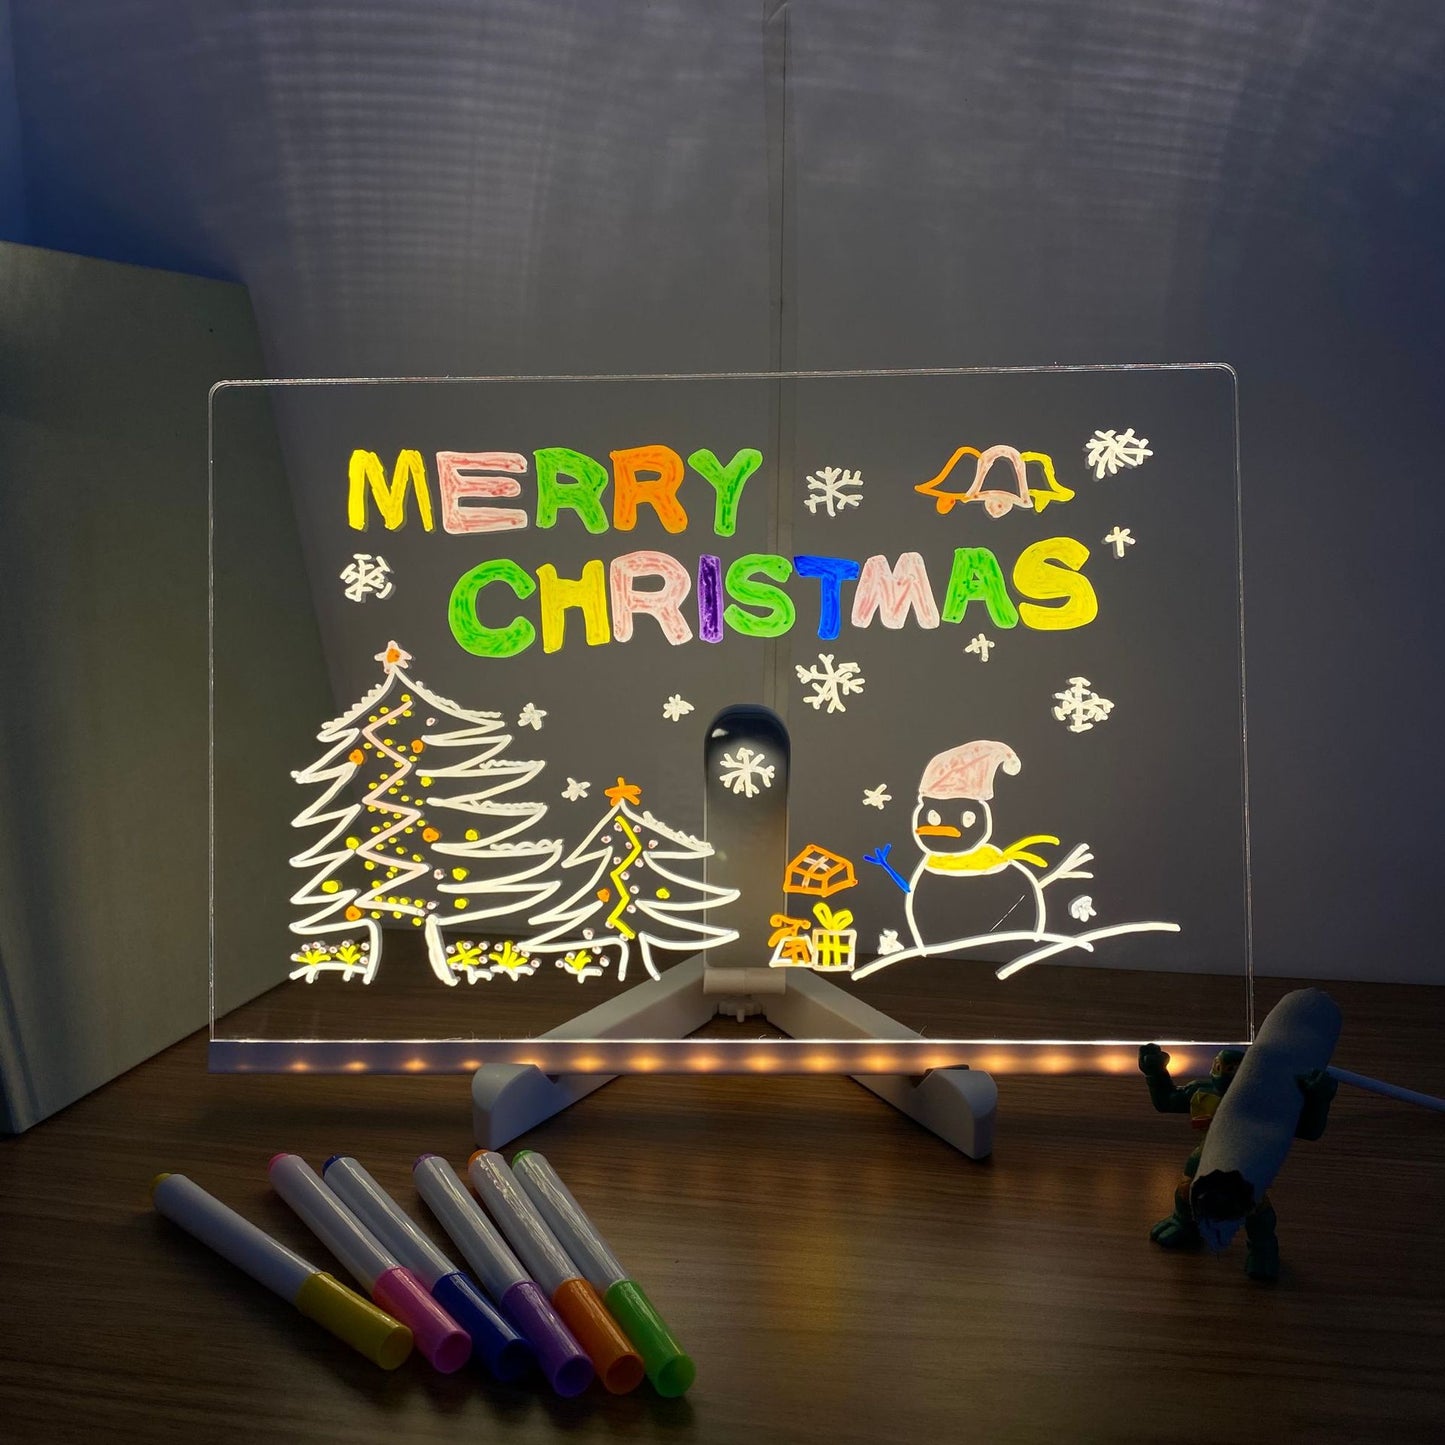 Multifunctional LED Desk Lamp with Customizable Luminous Message Board